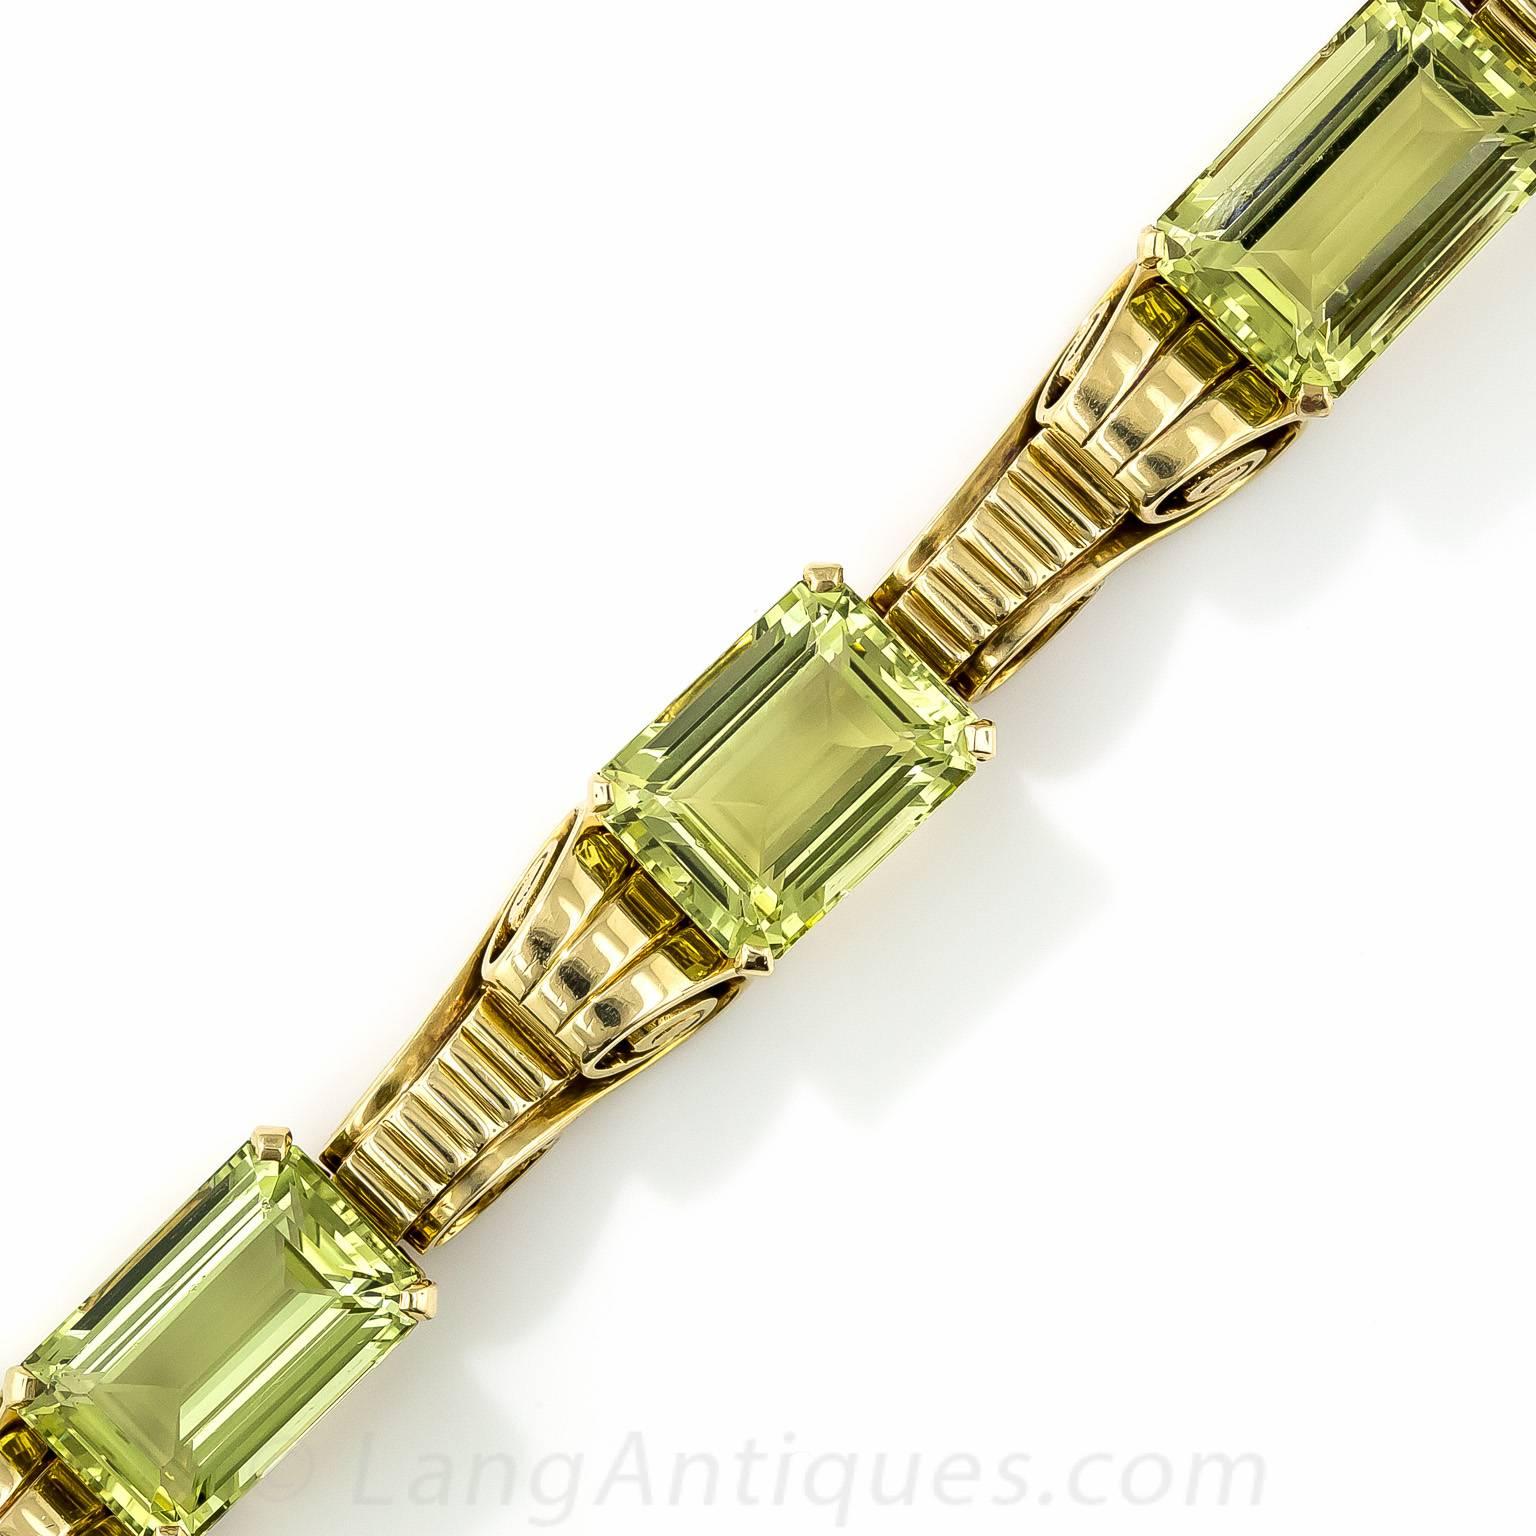 A ravishing rarity by America's foremost jeweler, Tiffany & Company - circa 1940s. This chic, boldly styled Retro bracelet glistens and glows with four emerald-cut beryls of an enchanting yellowish-green hue. Green Beryl is the same gemstone as